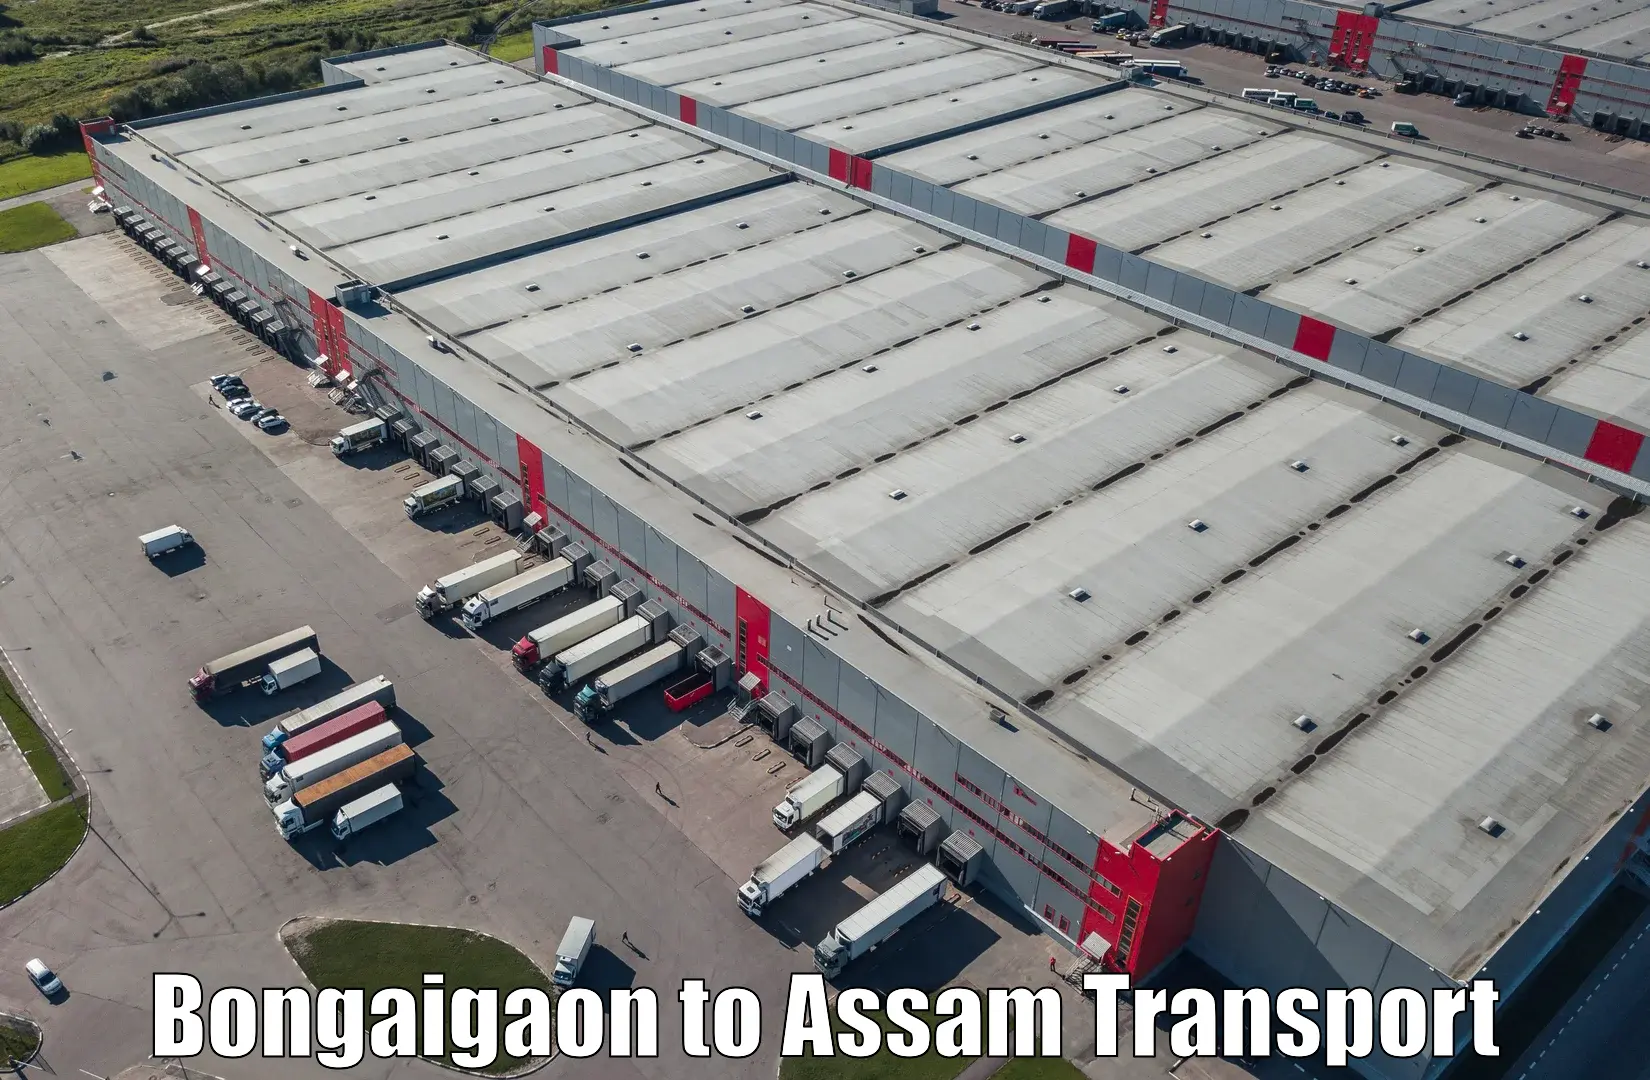 Truck transport companies in India Bongaigaon to Pailapool